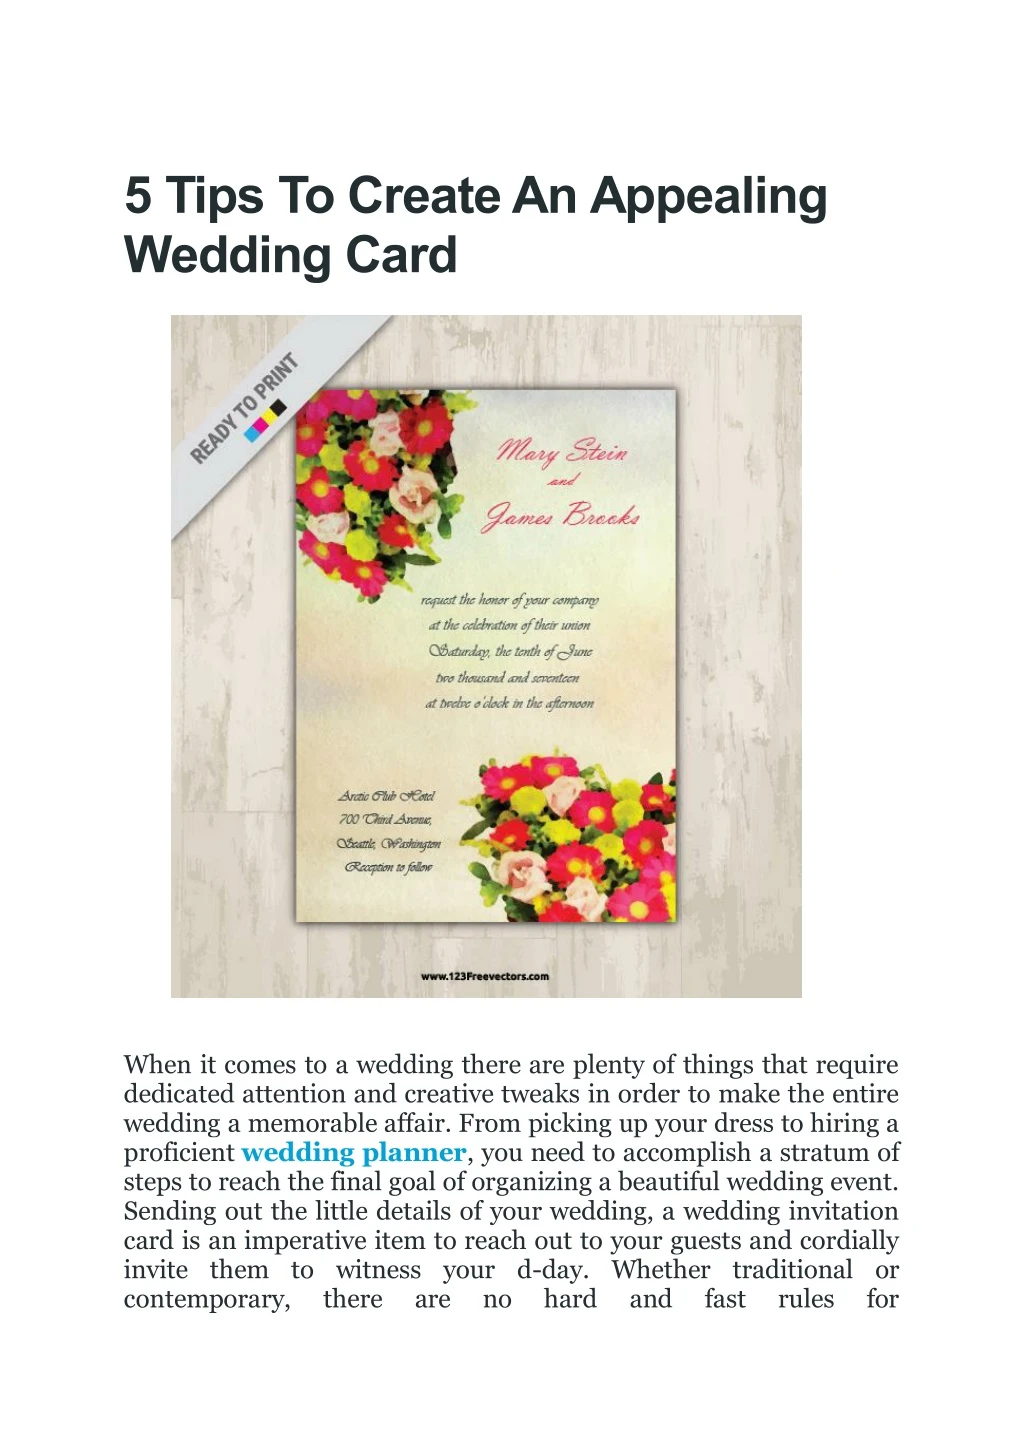 5 tips to create an appealing wedding card